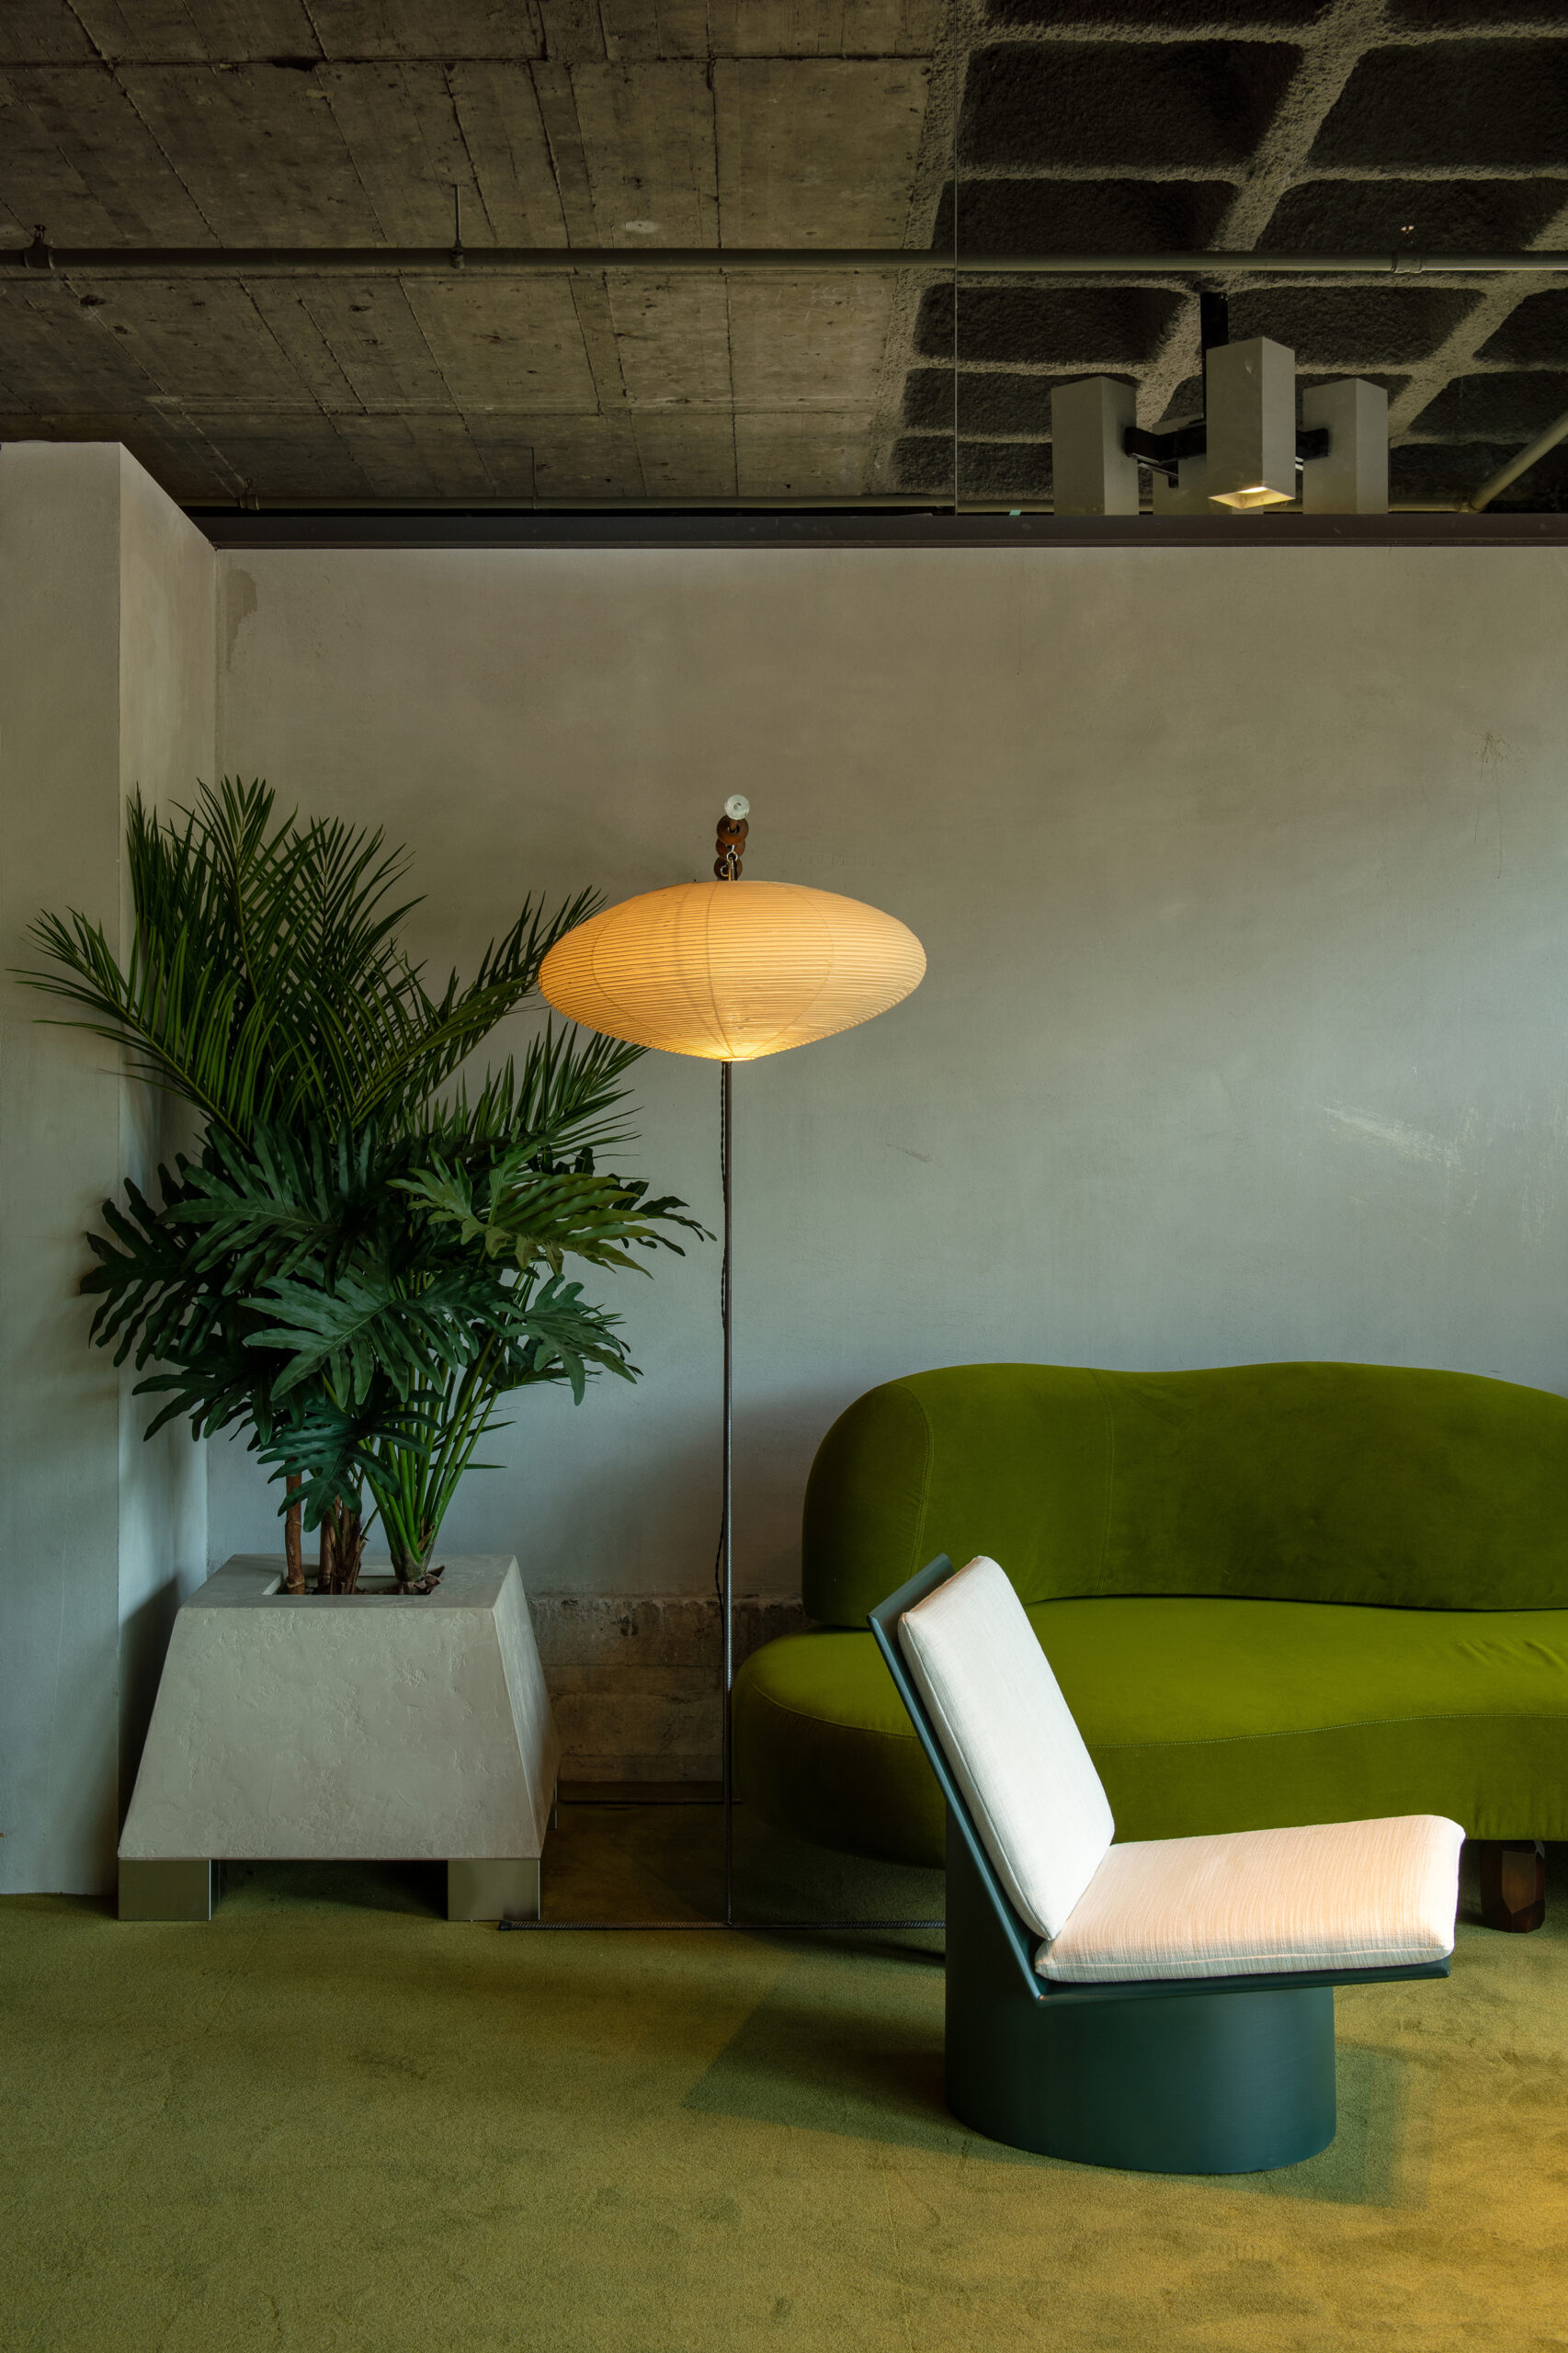 MIX by Brussels Artist Lionel Jadot hotel lounge area with green sofa and floor lamp